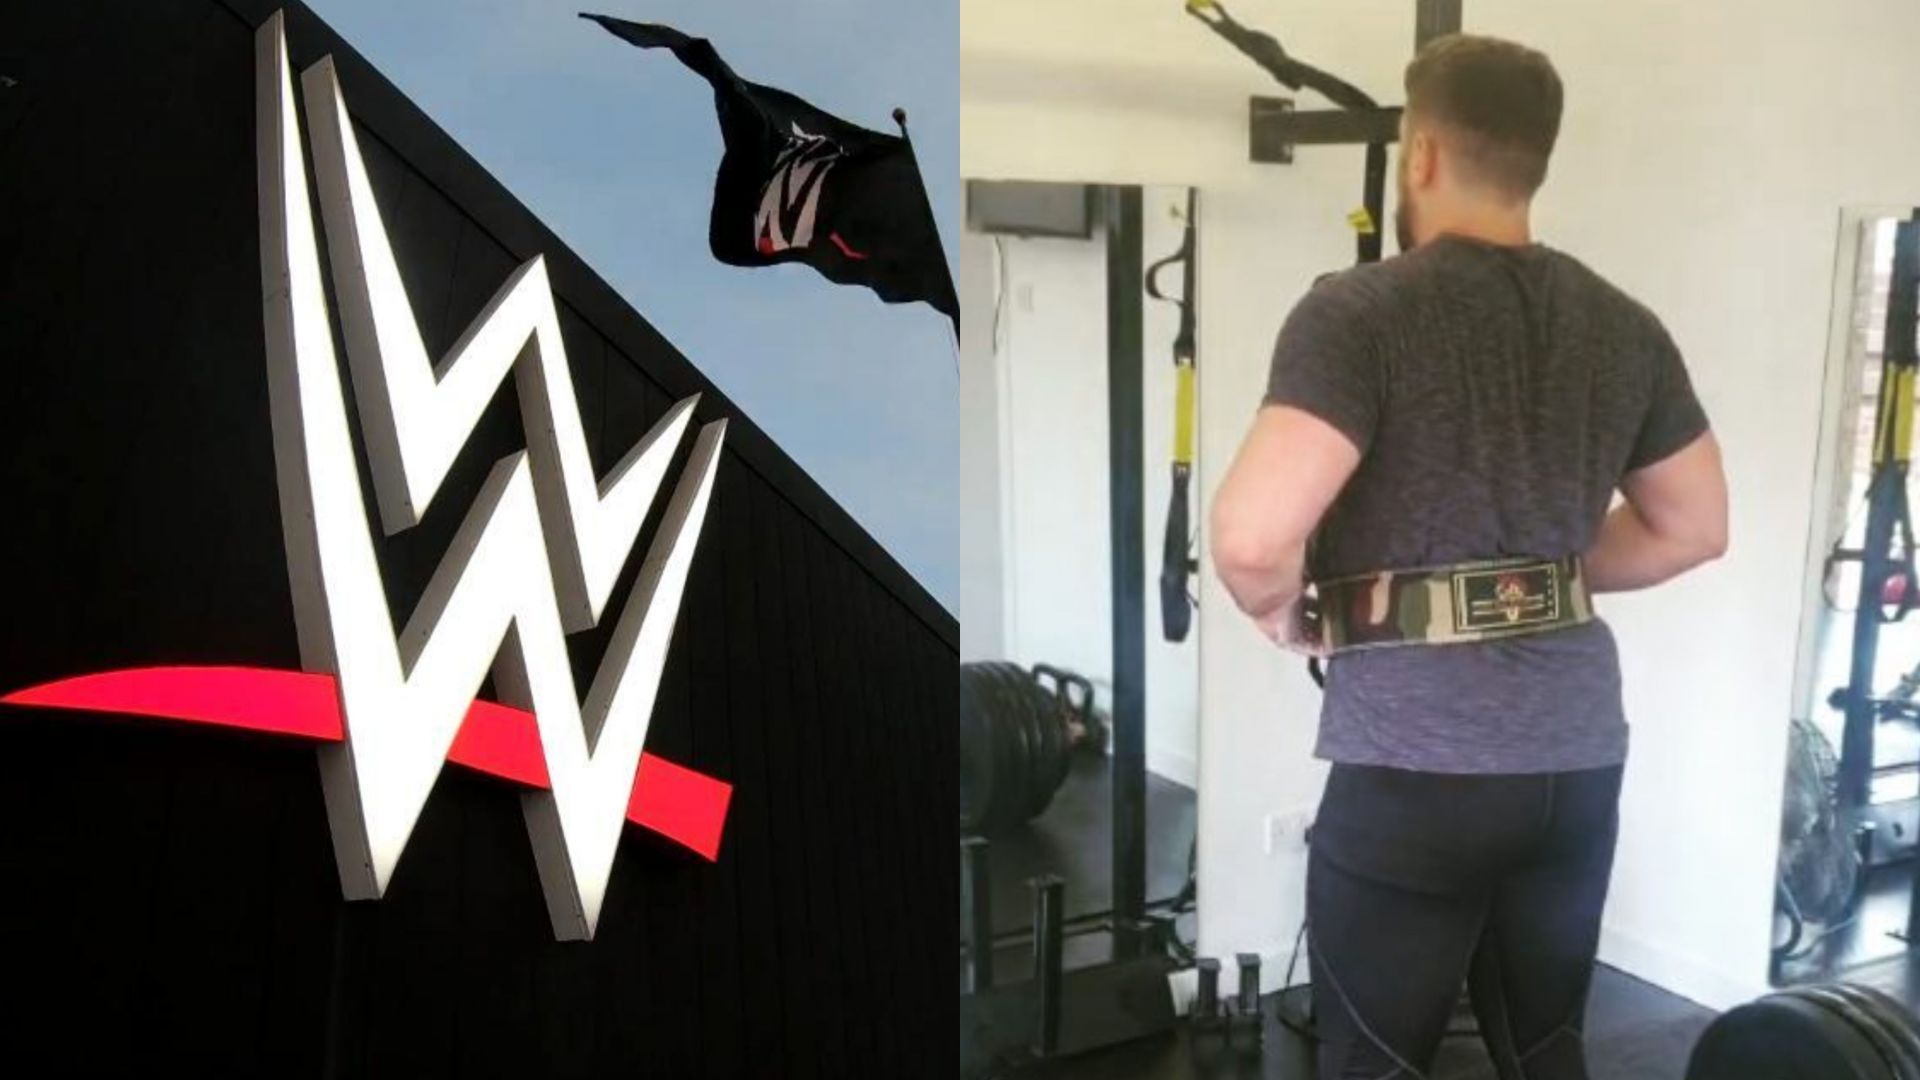 Will WWE sign a current champion who recently appeared on NXT? (Images credit: corporate.wwe.com and Joe Hendry